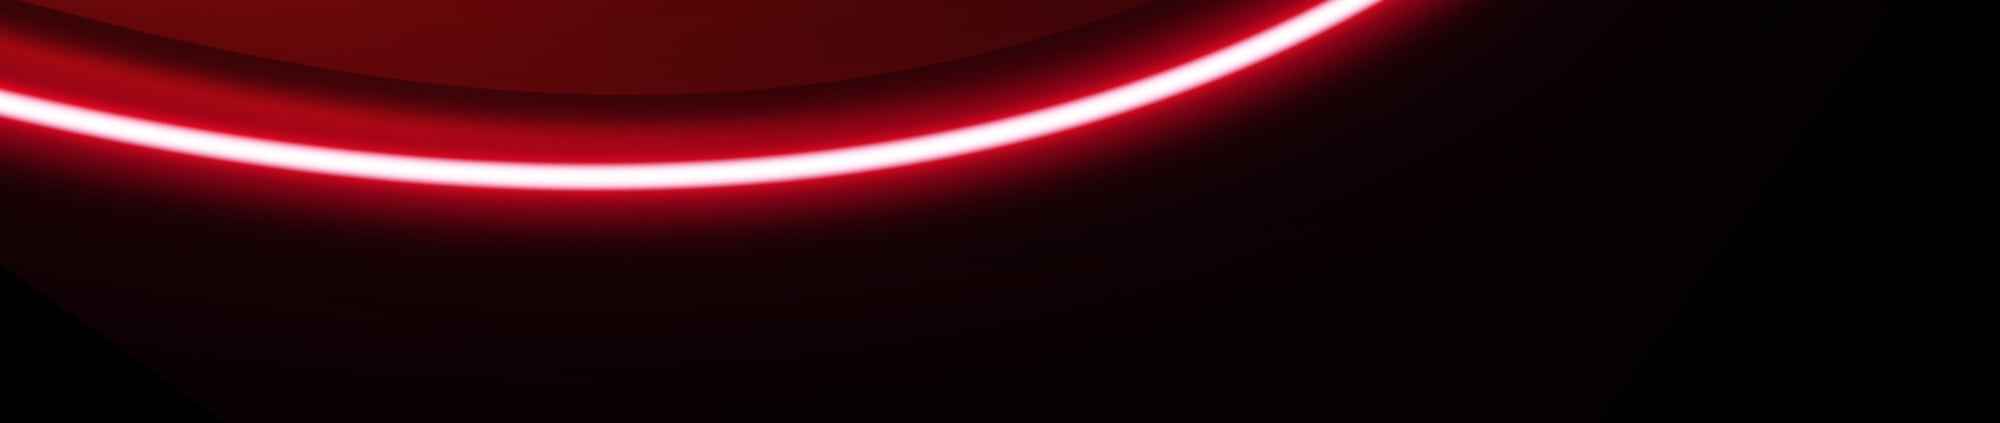 LG-Mission-for-the-future-red-banner-2800x1500-v007-2-1